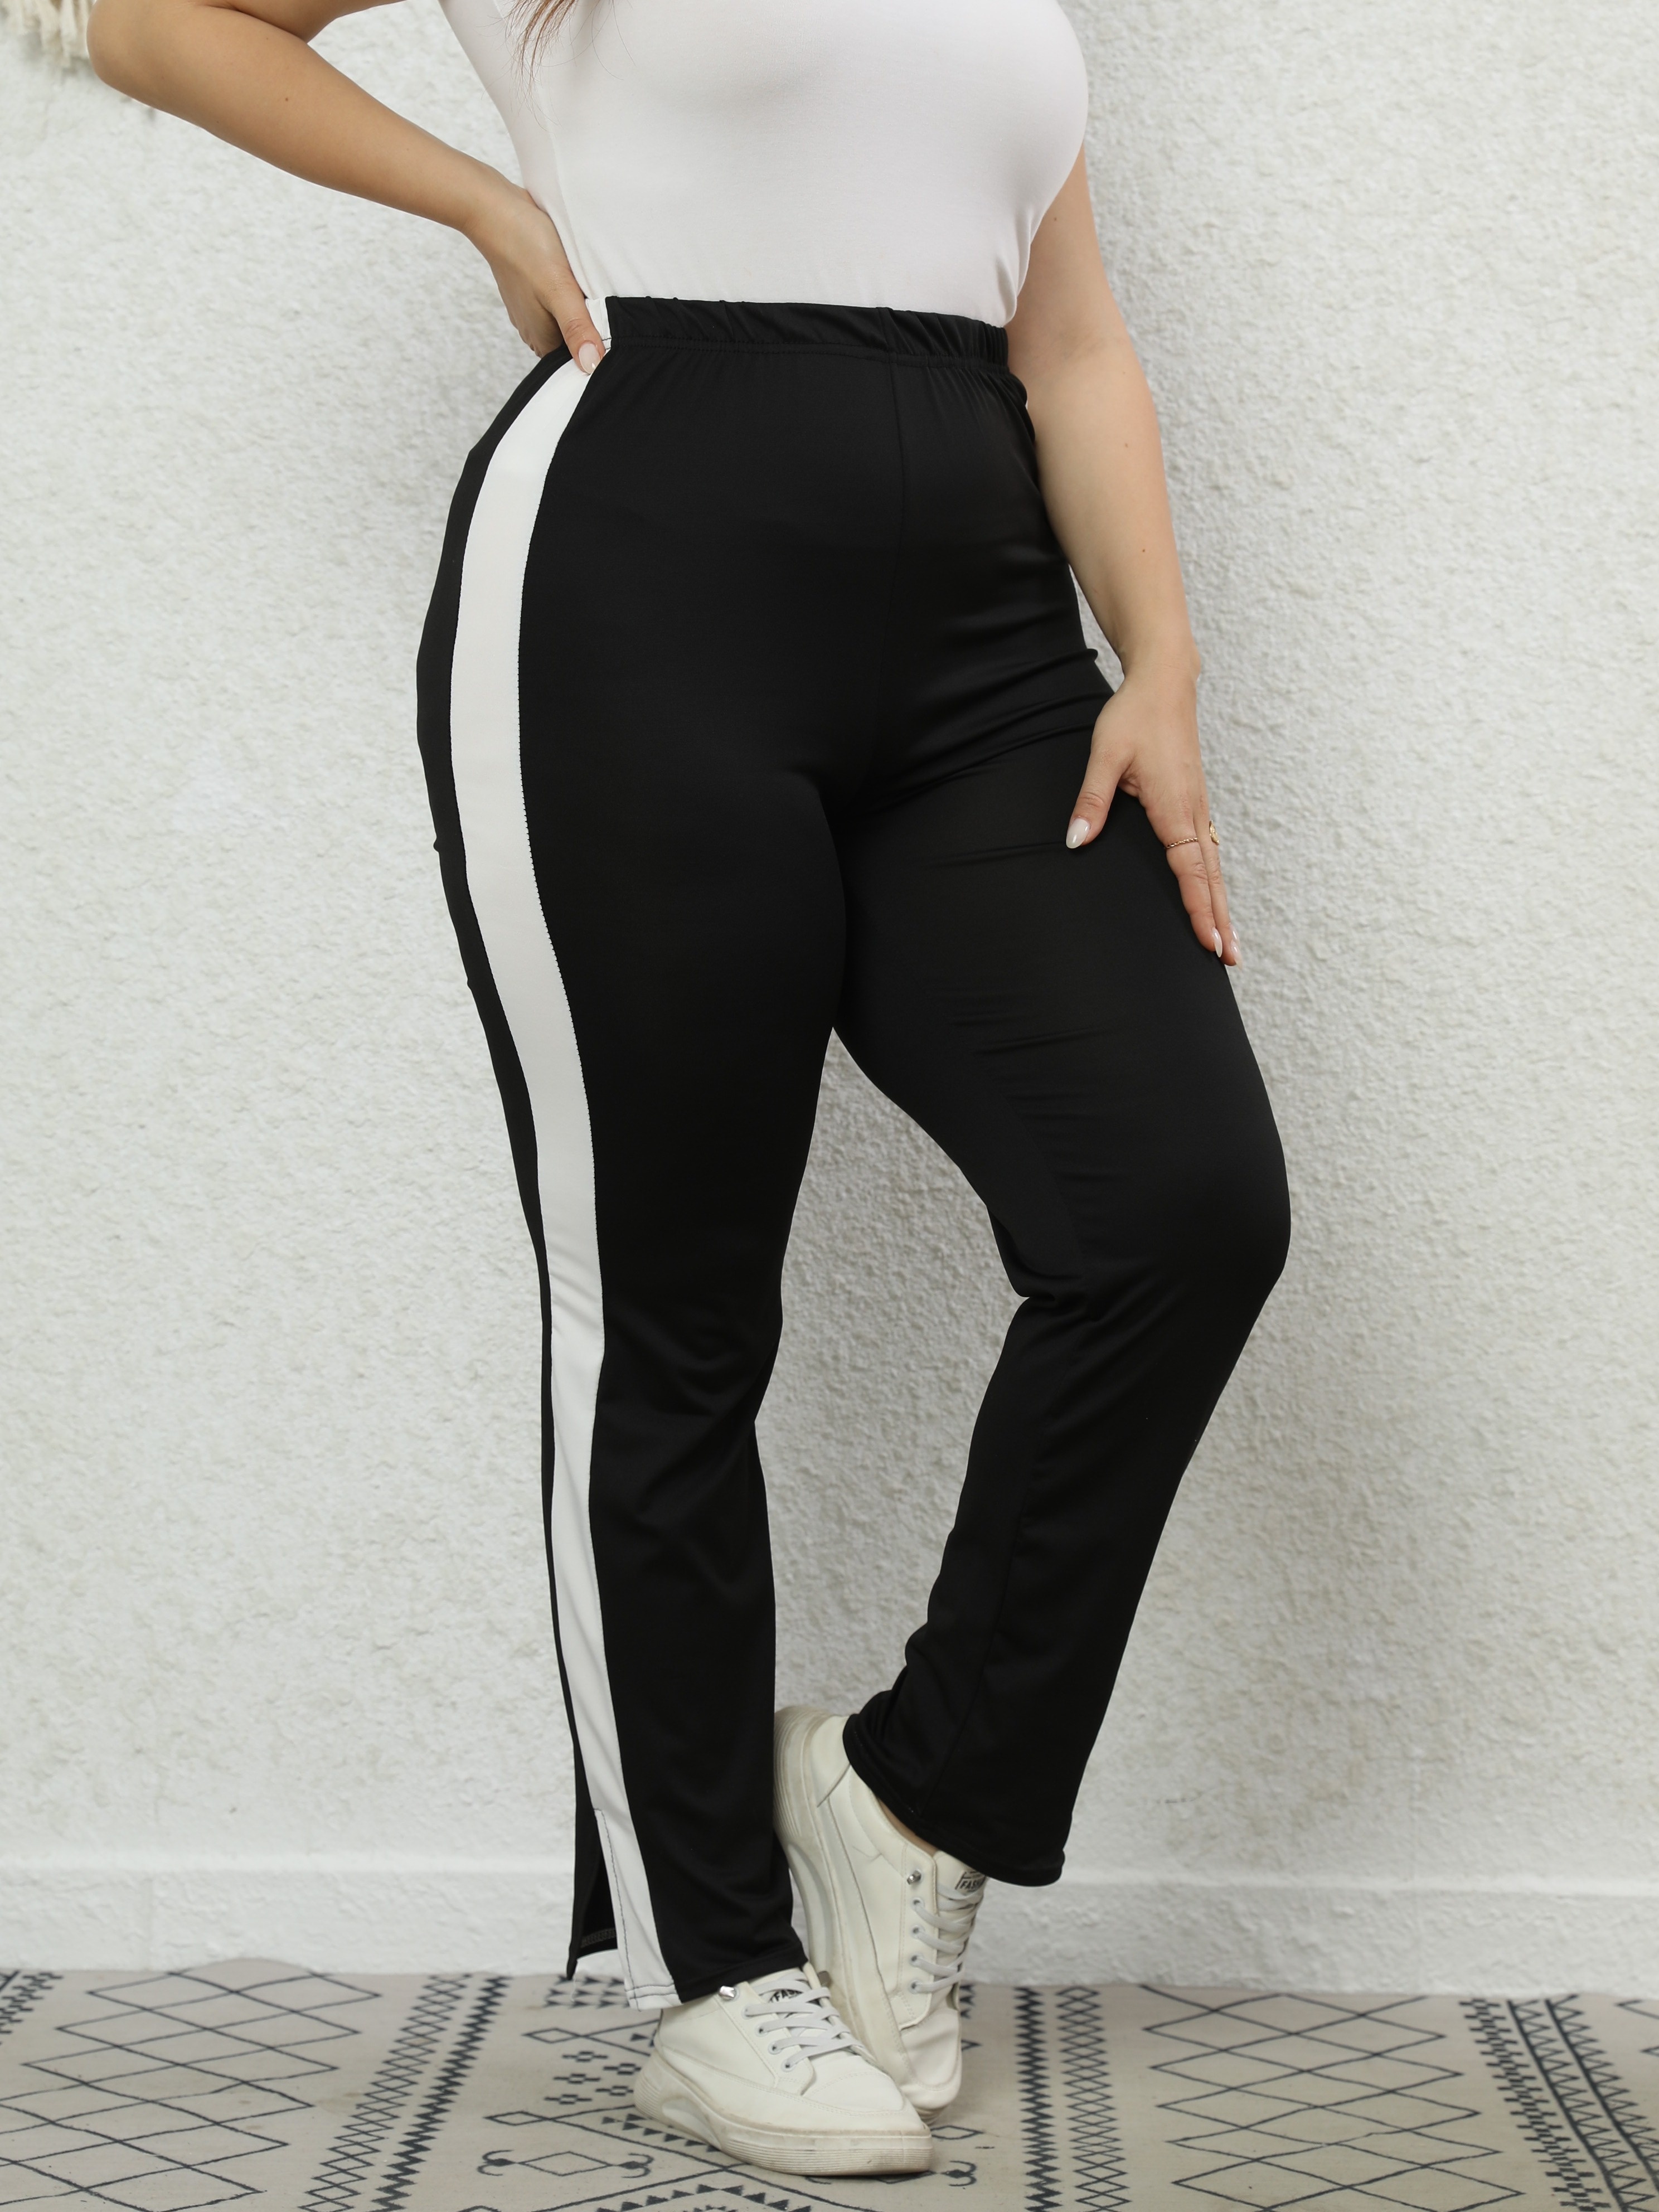 Plus Front Split High Waisted Pants